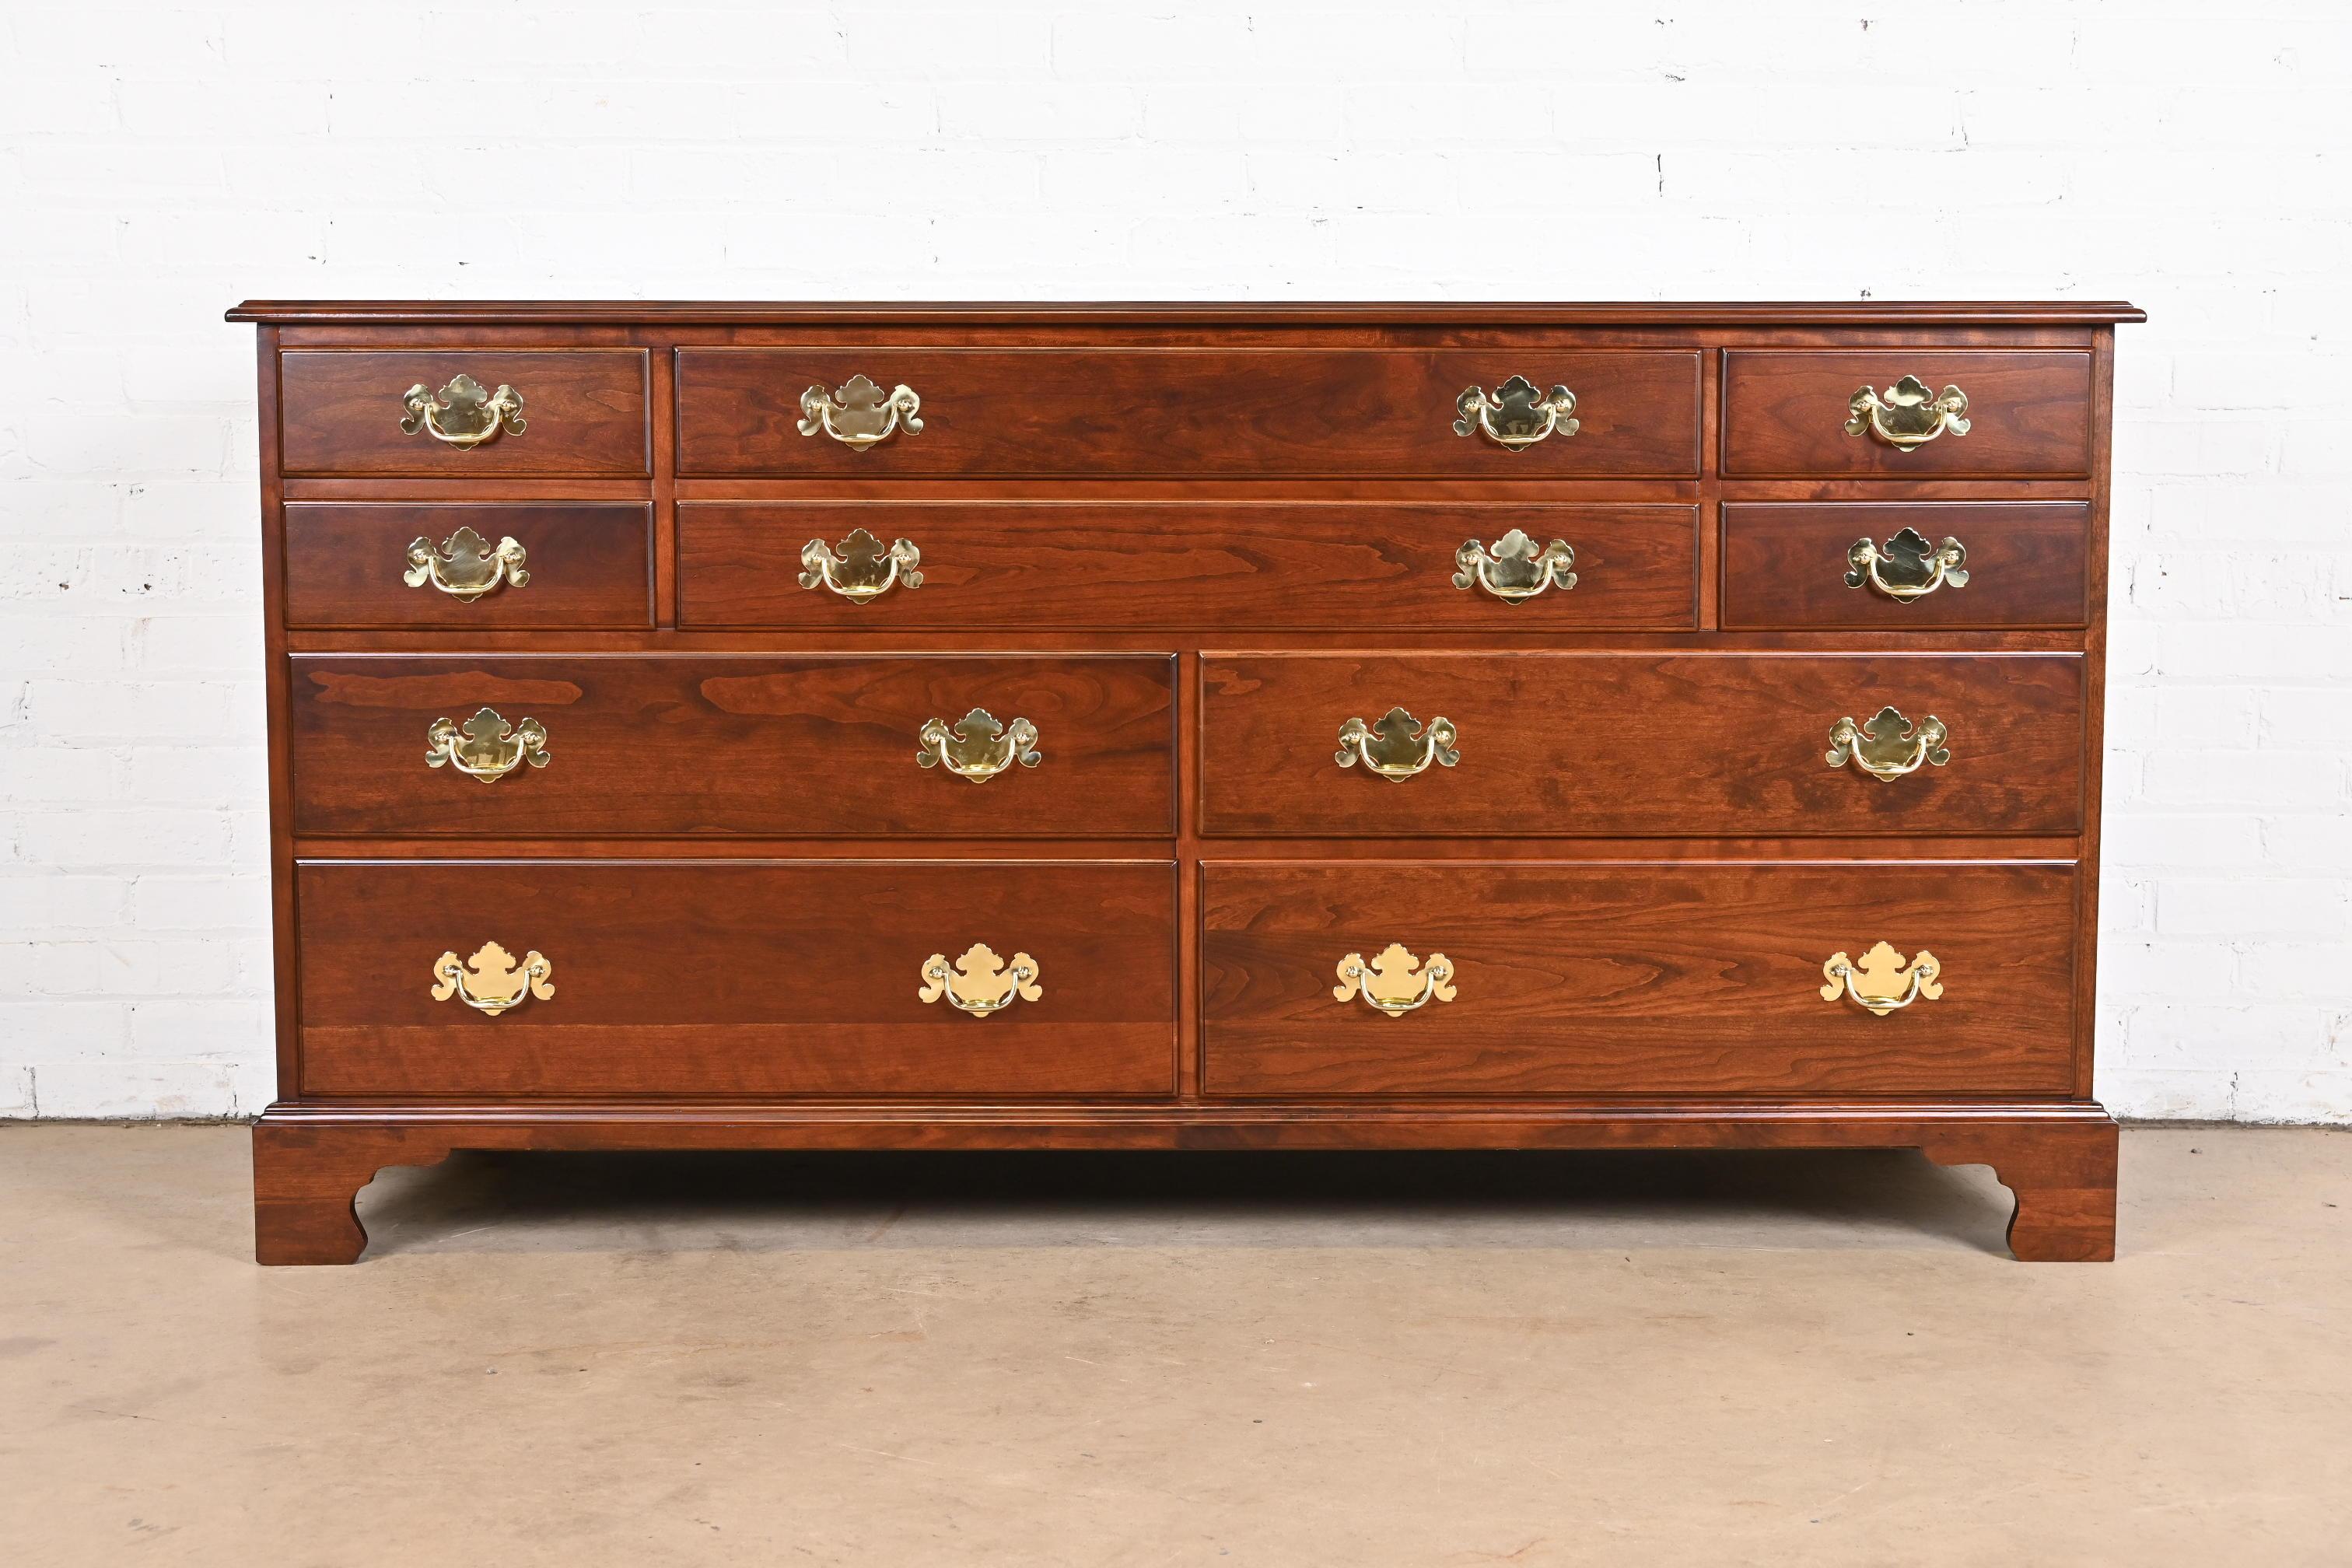 An exceptional Georgian or Chippendale style ten-drawer dresser or credenza

By Henkel Harris

USA, 1975

Solid wild black cherry wood, with original brass hardware.

Measures: 66